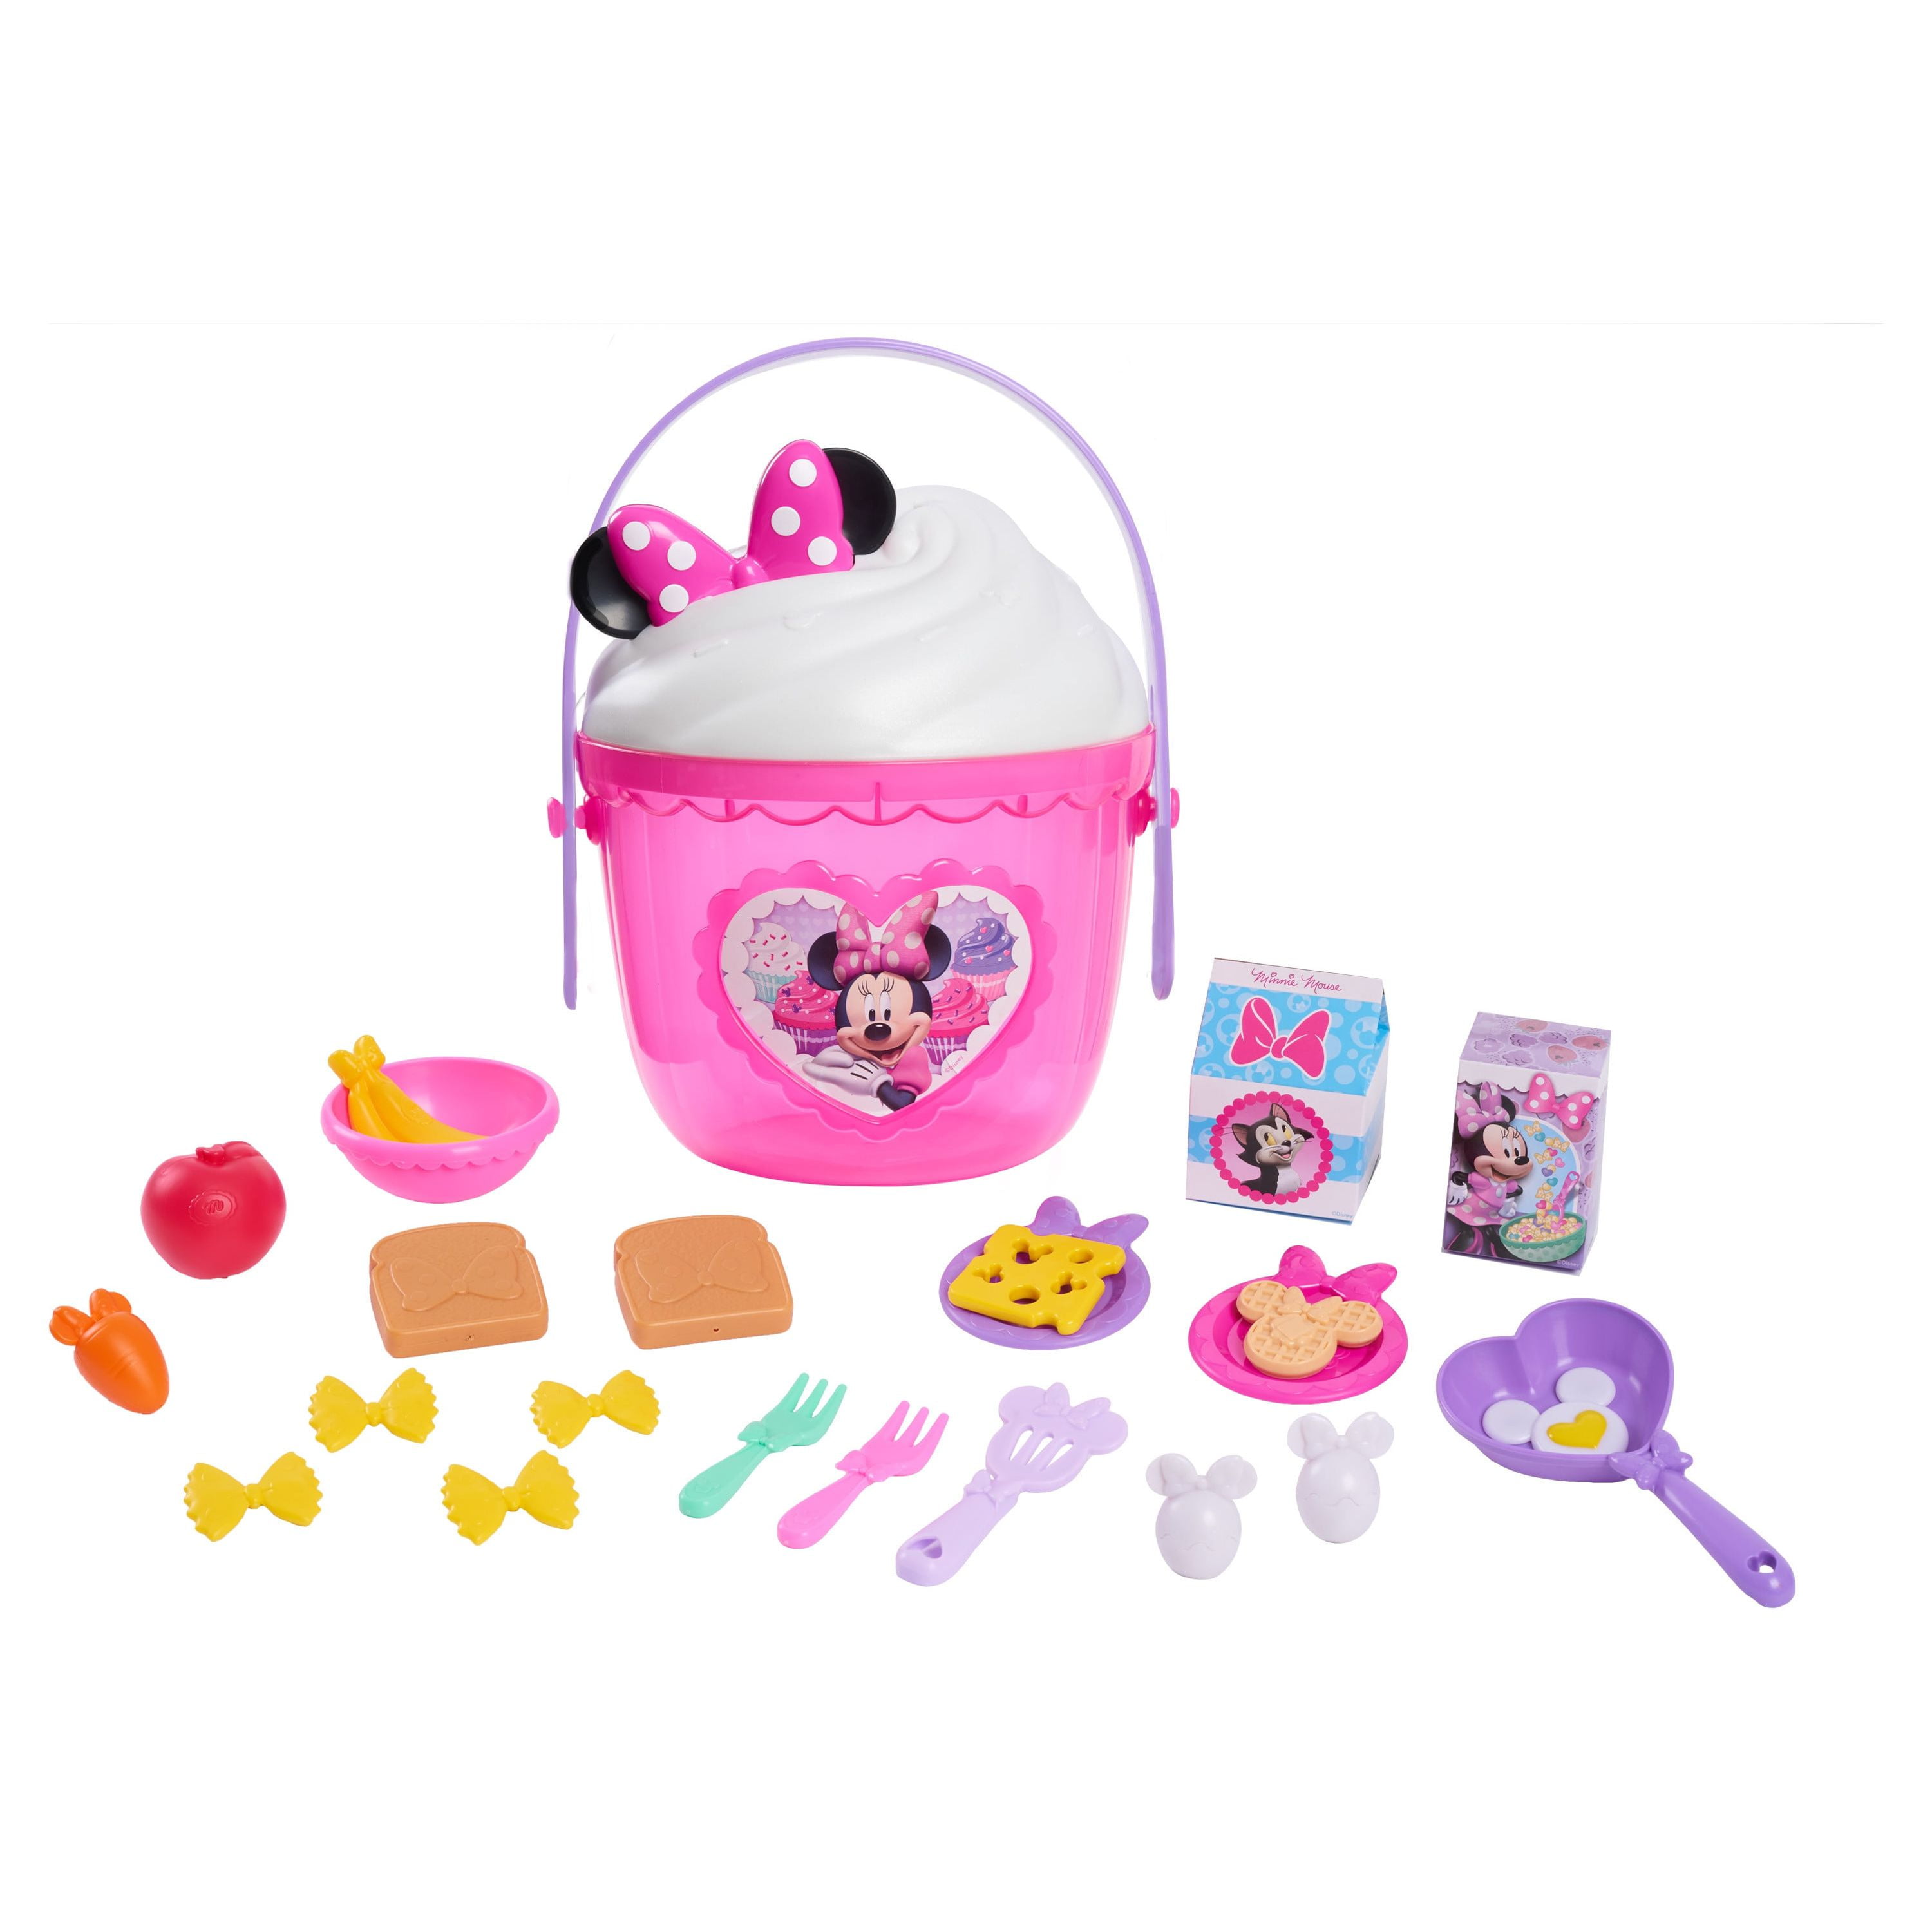 Pretend Play with Minnie Mouse Kitchen Accessory Set 